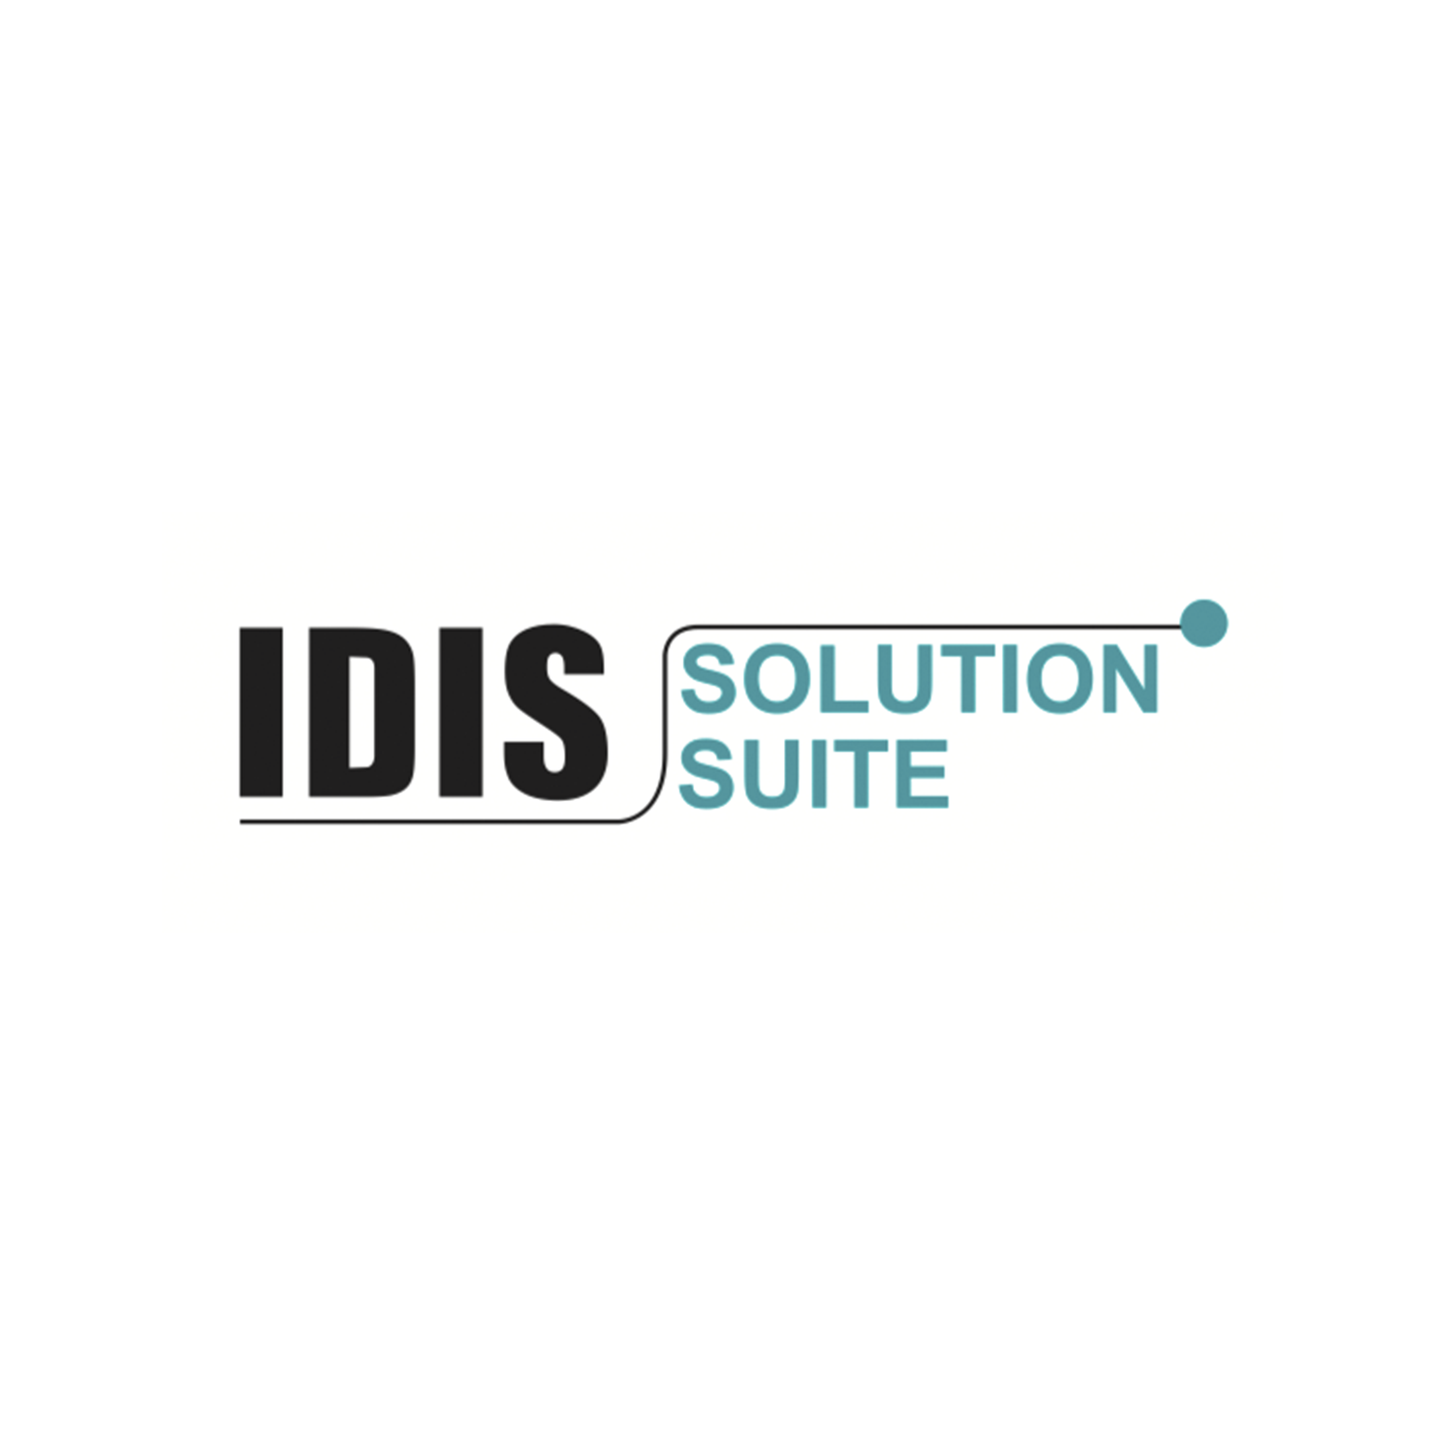 VMS License IDIS Solution Suite Expert for 1 device | Administration-Monitoring-Transmission-Recording-Update- Basic Analytics | Up to 64 simultaneous users